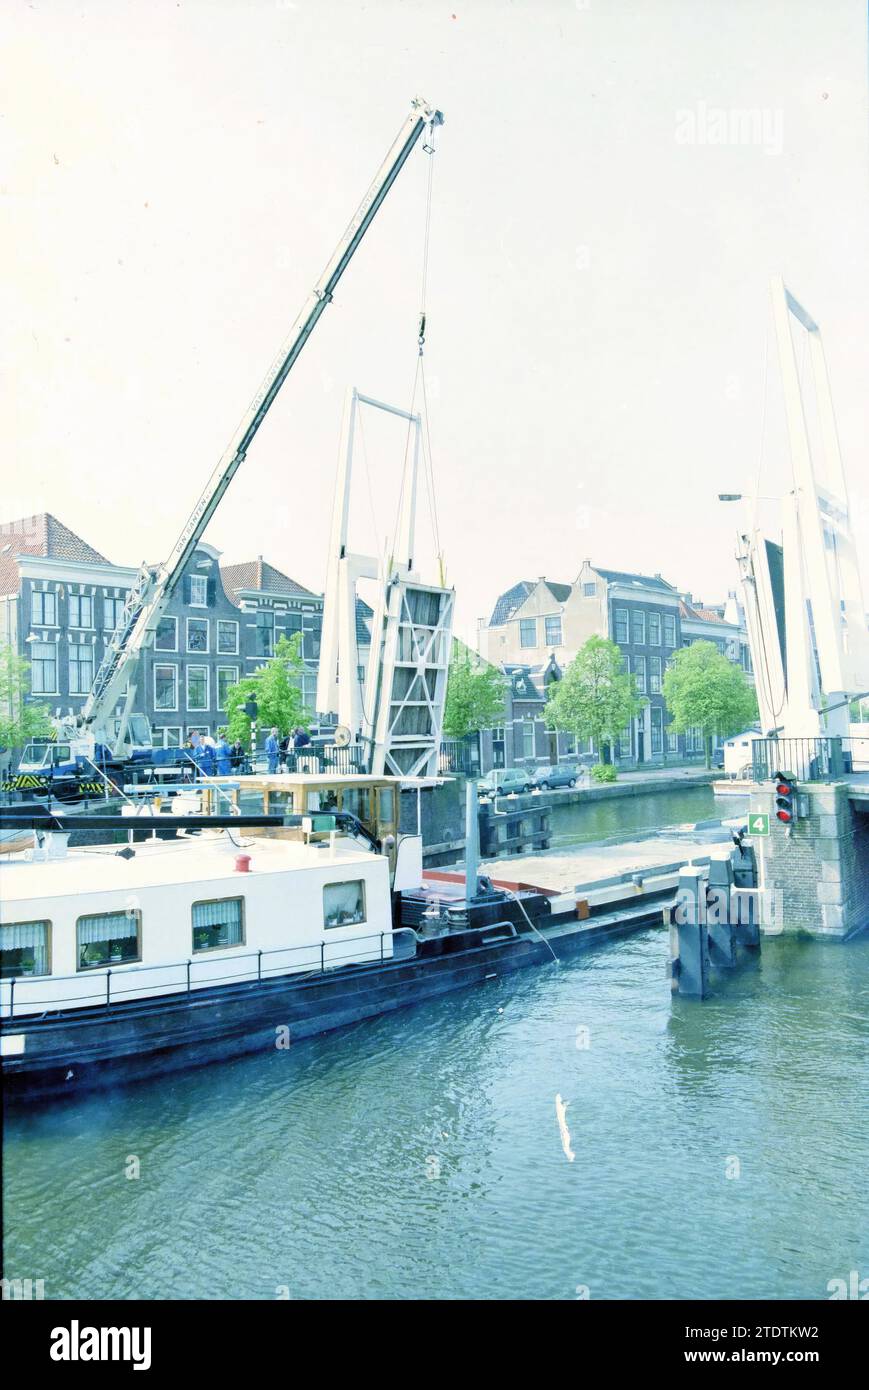 Gravesteen bridge broken, Haarlem, The Netherlands, 15-05-1997, Whizgle News from the Past, Tailored for the Future. Explore historical narratives, Dutch The Netherlands agency image with a modern perspective, bridging the gap between yesterday's events and tomorrow's insights. A timeless journey shaping the stories that shape our future Stock Photo